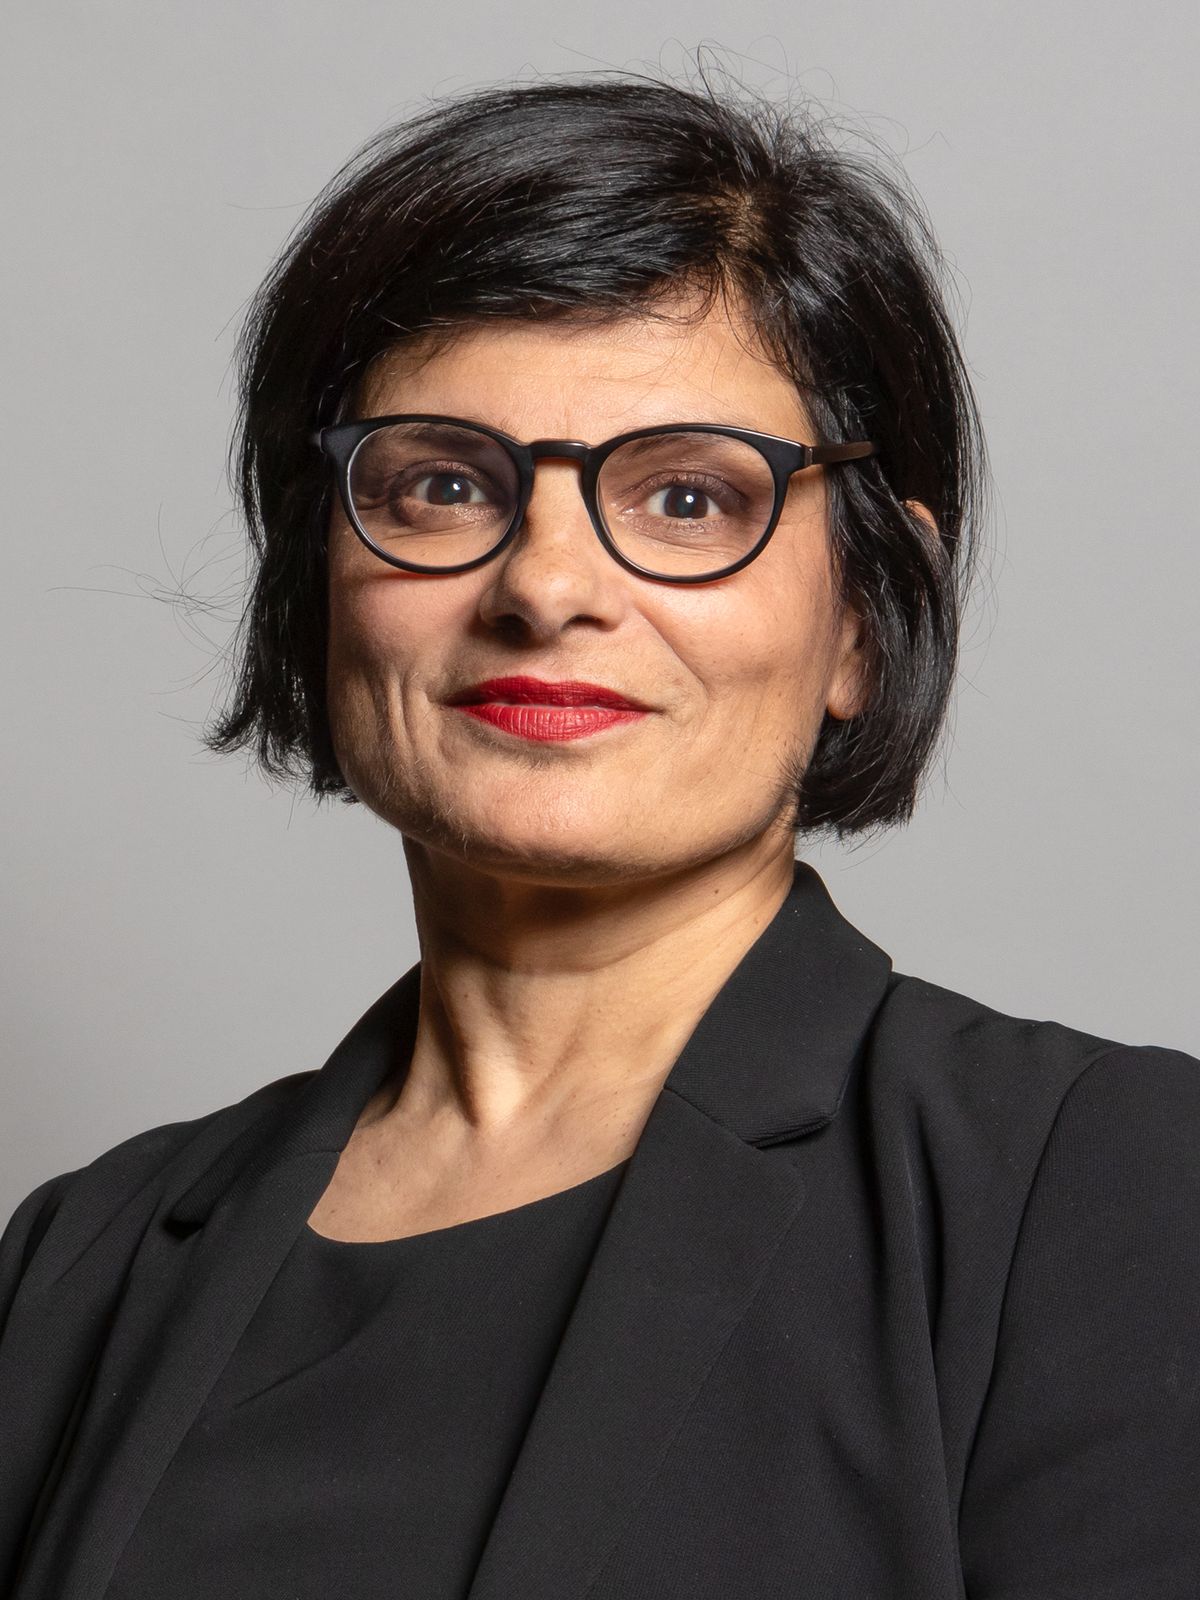 Official parliamentary portrait of Thangam Debbonaire MP Licensed under CC BY 3.0